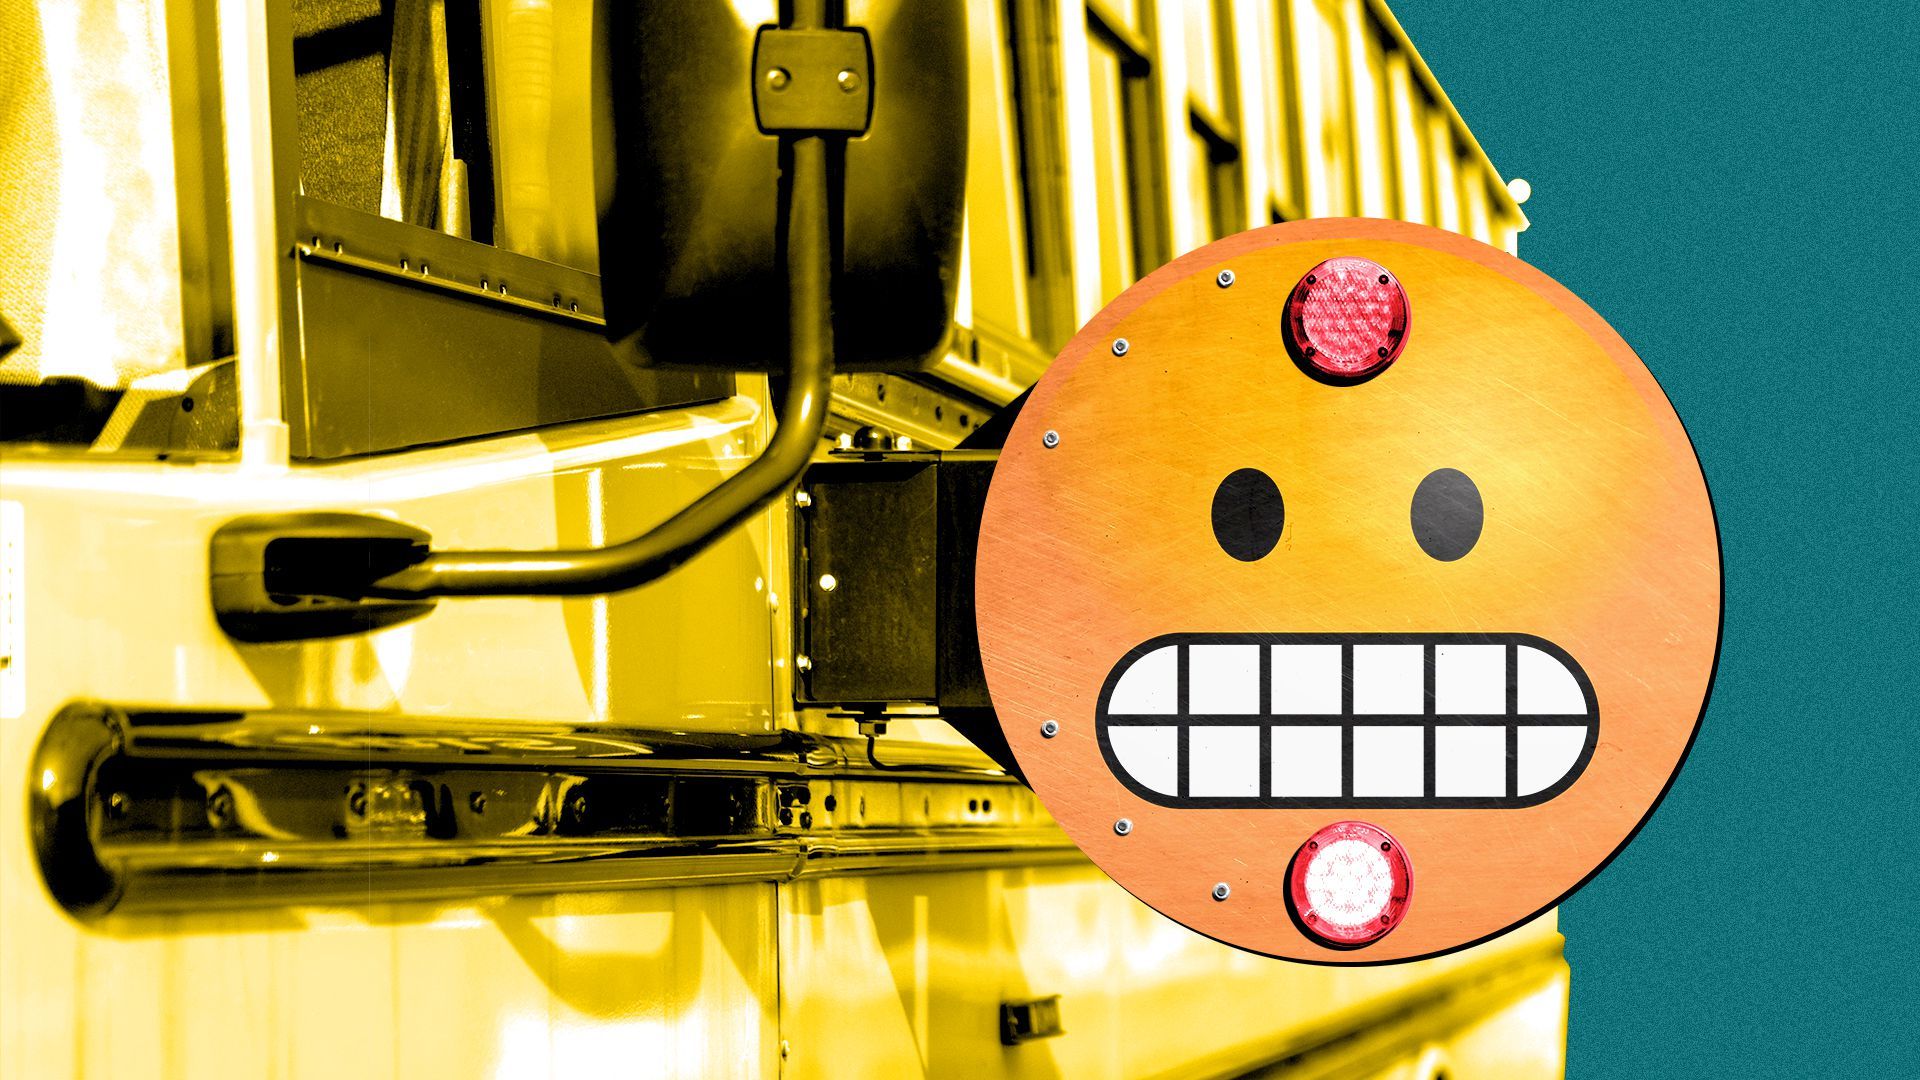 Illustration of a school bus with a grimacing emoji instead of a stop sign. 